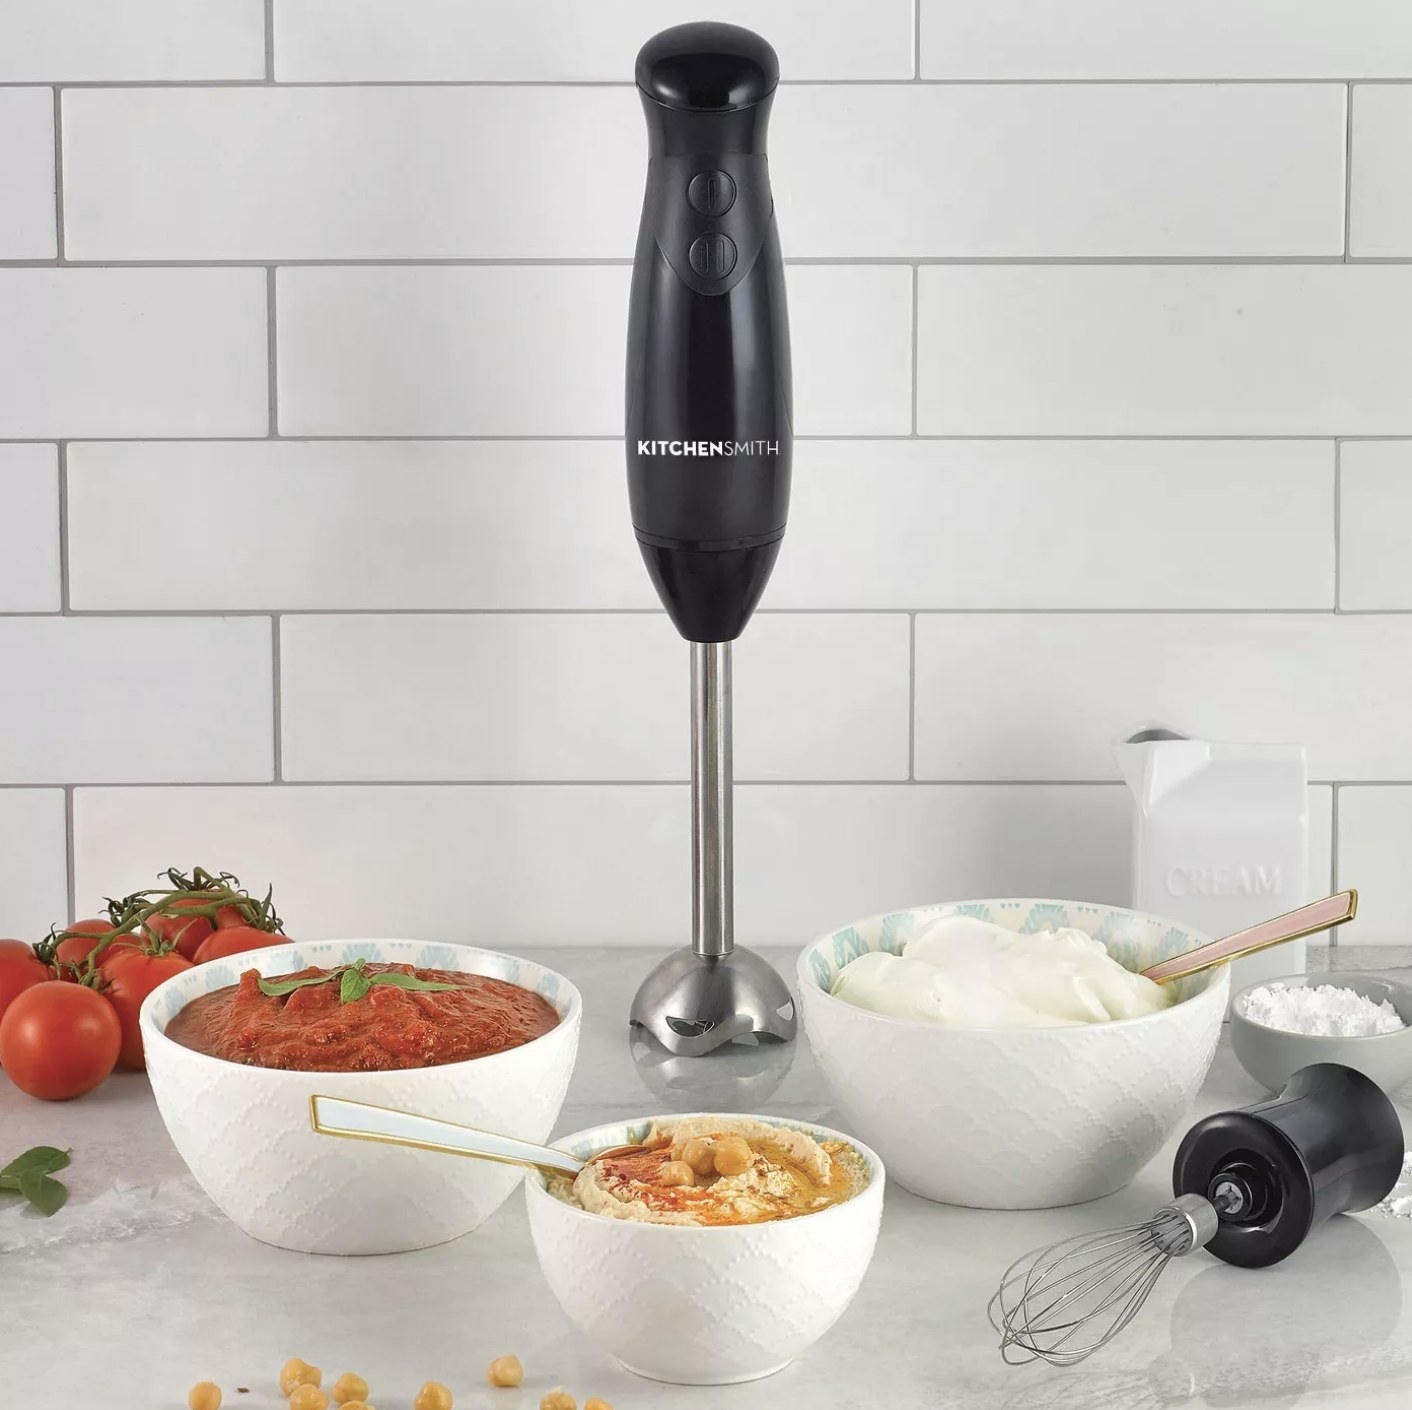 The immersion blender next to bowls of food